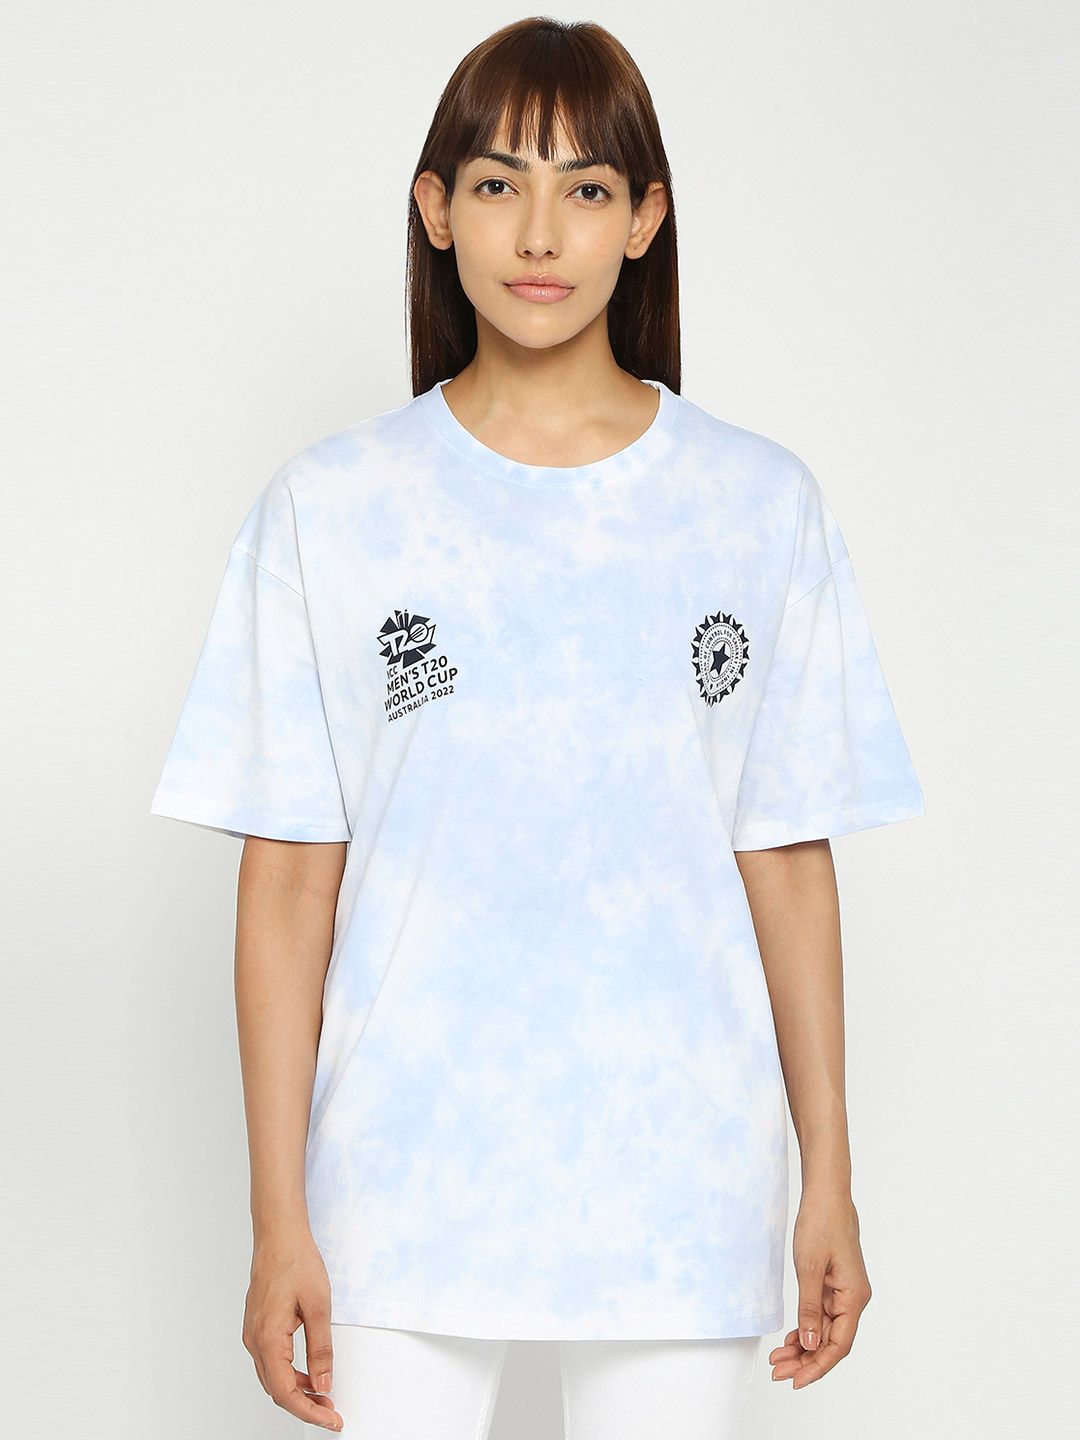 Buy Women White & Blue Printed Round Neck T-Shirt From Fancode Shop.